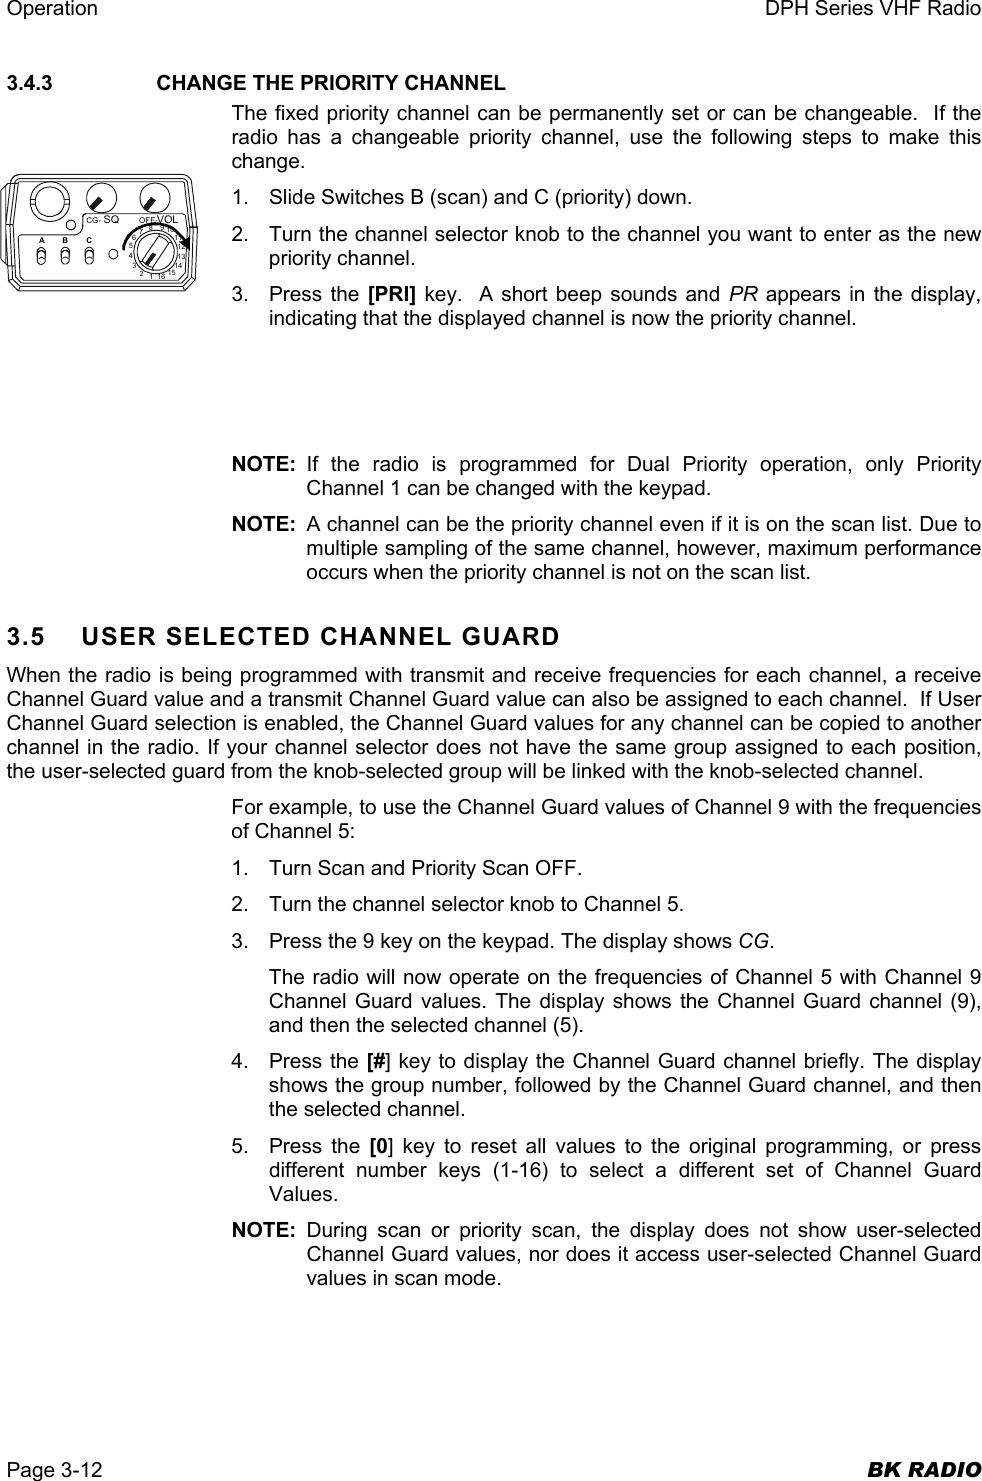 Operation  DPH Series VHF Radio  Page 3-12  BK RADIO 3.4.3     CHANGE THE PRIORITY CHANNEL The fixed priority channel can be permanently set or can be changeable.  If the radio has a changeable priority channel, use the following steps to make this change. 1.  Slide Switches B (scan) and C (priority) down. 2.  Turn the channel selector knob to the channel you want to enter as the new priority channel. 3. Press the [PRI] key.  A short beep sounds and PR  appears in the display, indicating that the displayed channel is now the priority channel.    NOTE: If the radio is programmed for Dual Priority operation, only Priority Channel 1 can be changed with the keypad. NOTE:  A channel can be the priority channel even if it is on the scan list. Due to multiple sampling of the same channel, however, maximum performance occurs when the priority channel is not on the scan list. 3.5 USER SELECTED CHANNEL GUARD When the radio is being programmed with transmit and receive frequencies for each channel, a receive Channel Guard value and a transmit Channel Guard value can also be assigned to each channel.  If User Channel Guard selection is enabled, the Channel Guard values for any channel can be copied to another channel in the radio. If your channel selector does not have the same group assigned to each position, the user-selected guard from the knob-selected group will be linked with the knob-selected channel. For example, to use the Channel Guard values of Channel 9 with the frequencies of Channel 5: 1.  Turn Scan and Priority Scan OFF. 2.  Turn the channel selector knob to Channel 5. 3.  Press the 9 key on the keypad. The display shows CG. The radio will now operate on the frequencies of Channel 5 with Channel 9 Channel Guard values. The display shows the Channel Guard channel (9), and then the selected channel (5). 4. Press the [#] key to display the Channel Guard channel briefly. The display shows the group number, followed by the Channel Guard channel, and then the selected channel.  5. Press the [0] key to reset all values to the original programming, or press different number keys (1-16) to select a different set of Channel Guard Values. NOTE:  During scan or priority scan, the display does not show user-selected Channel Guard values, nor does it access user-selected Channel Guard values in scan mode. CG- OFF-SQ VOL16123456789101112131415ABC